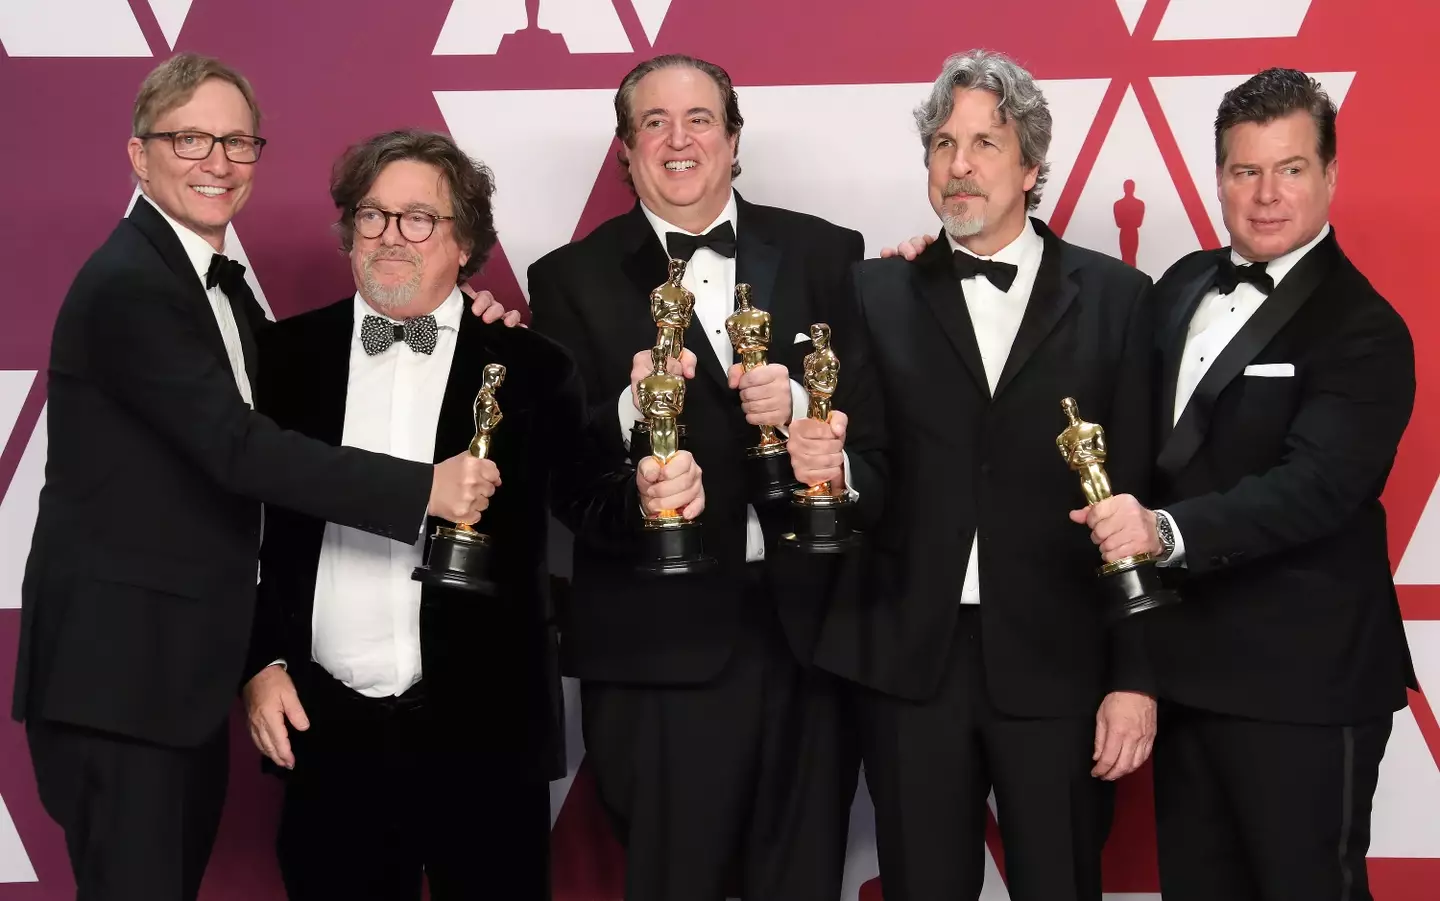 This bunch won Oscars as Green Book ended up being crowned Best Picture.